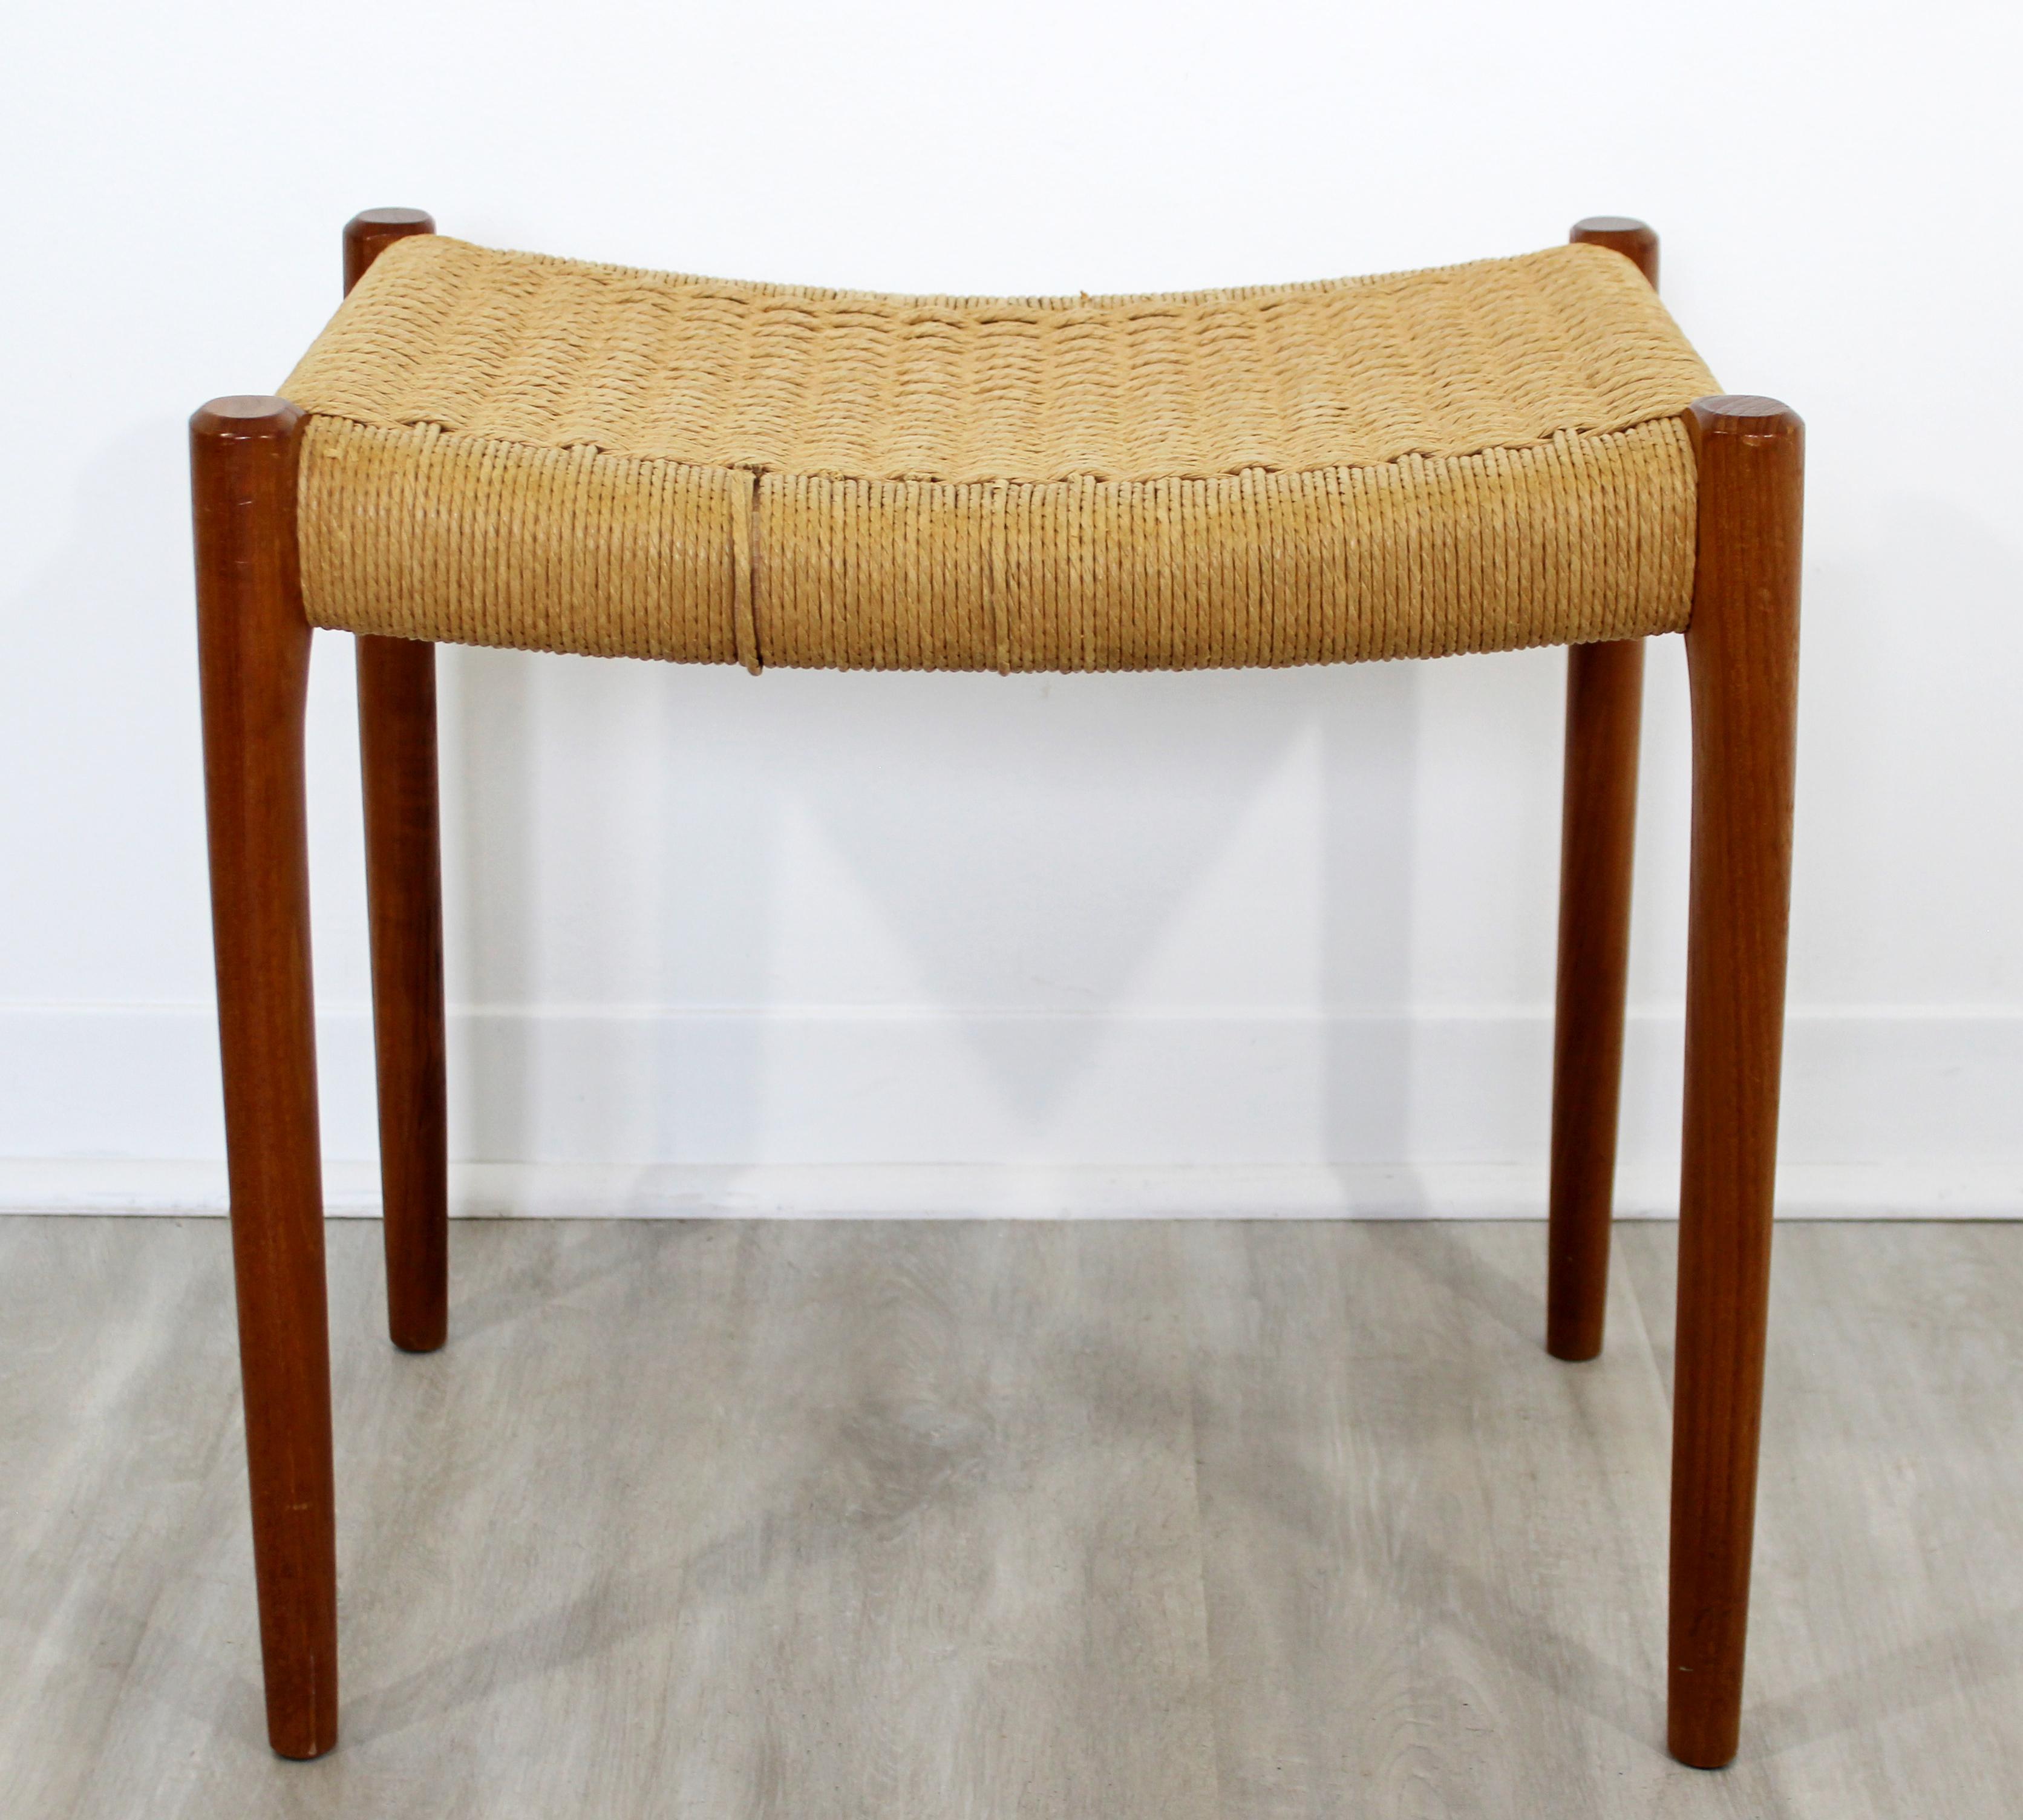 For your consideration is a Danish teak bench, with a rope seat, by Neils Moller, circa 1960s. In good vintage condition. The dimensions are 19.5